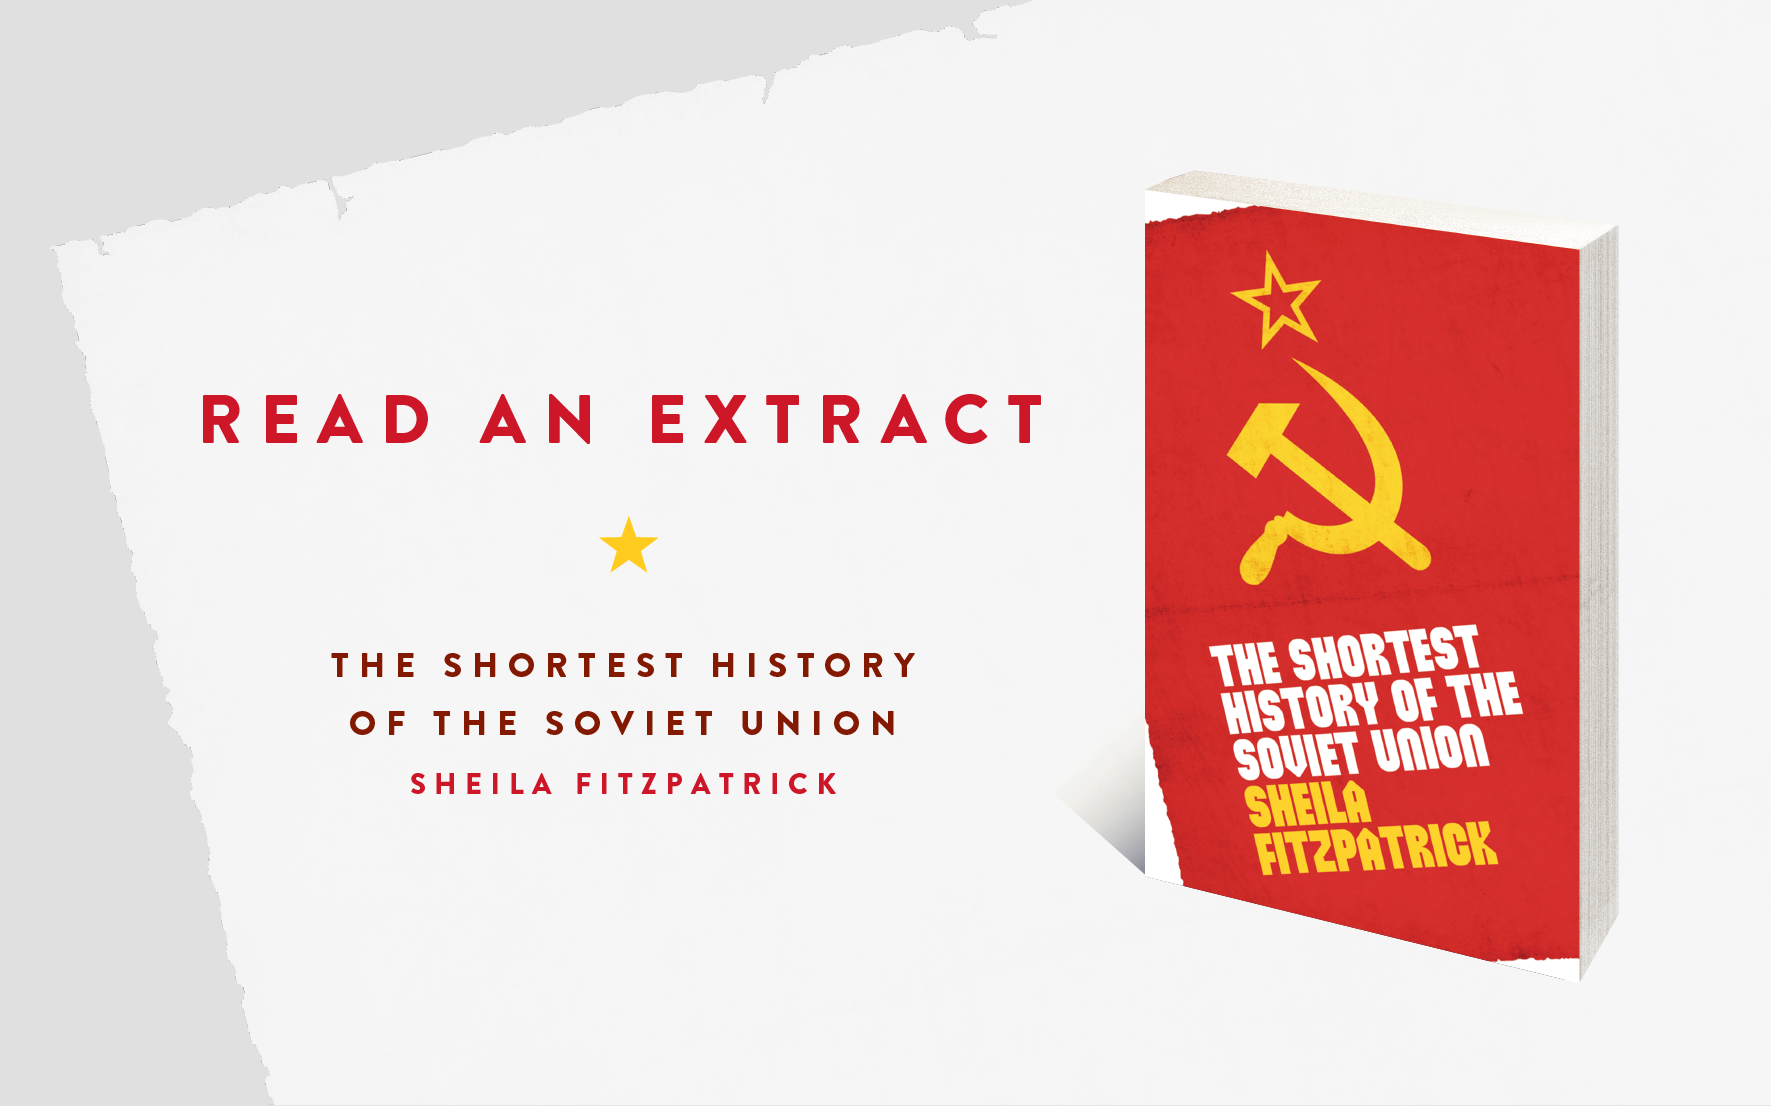 Read an extract: The Shortest History of the Soviet Union